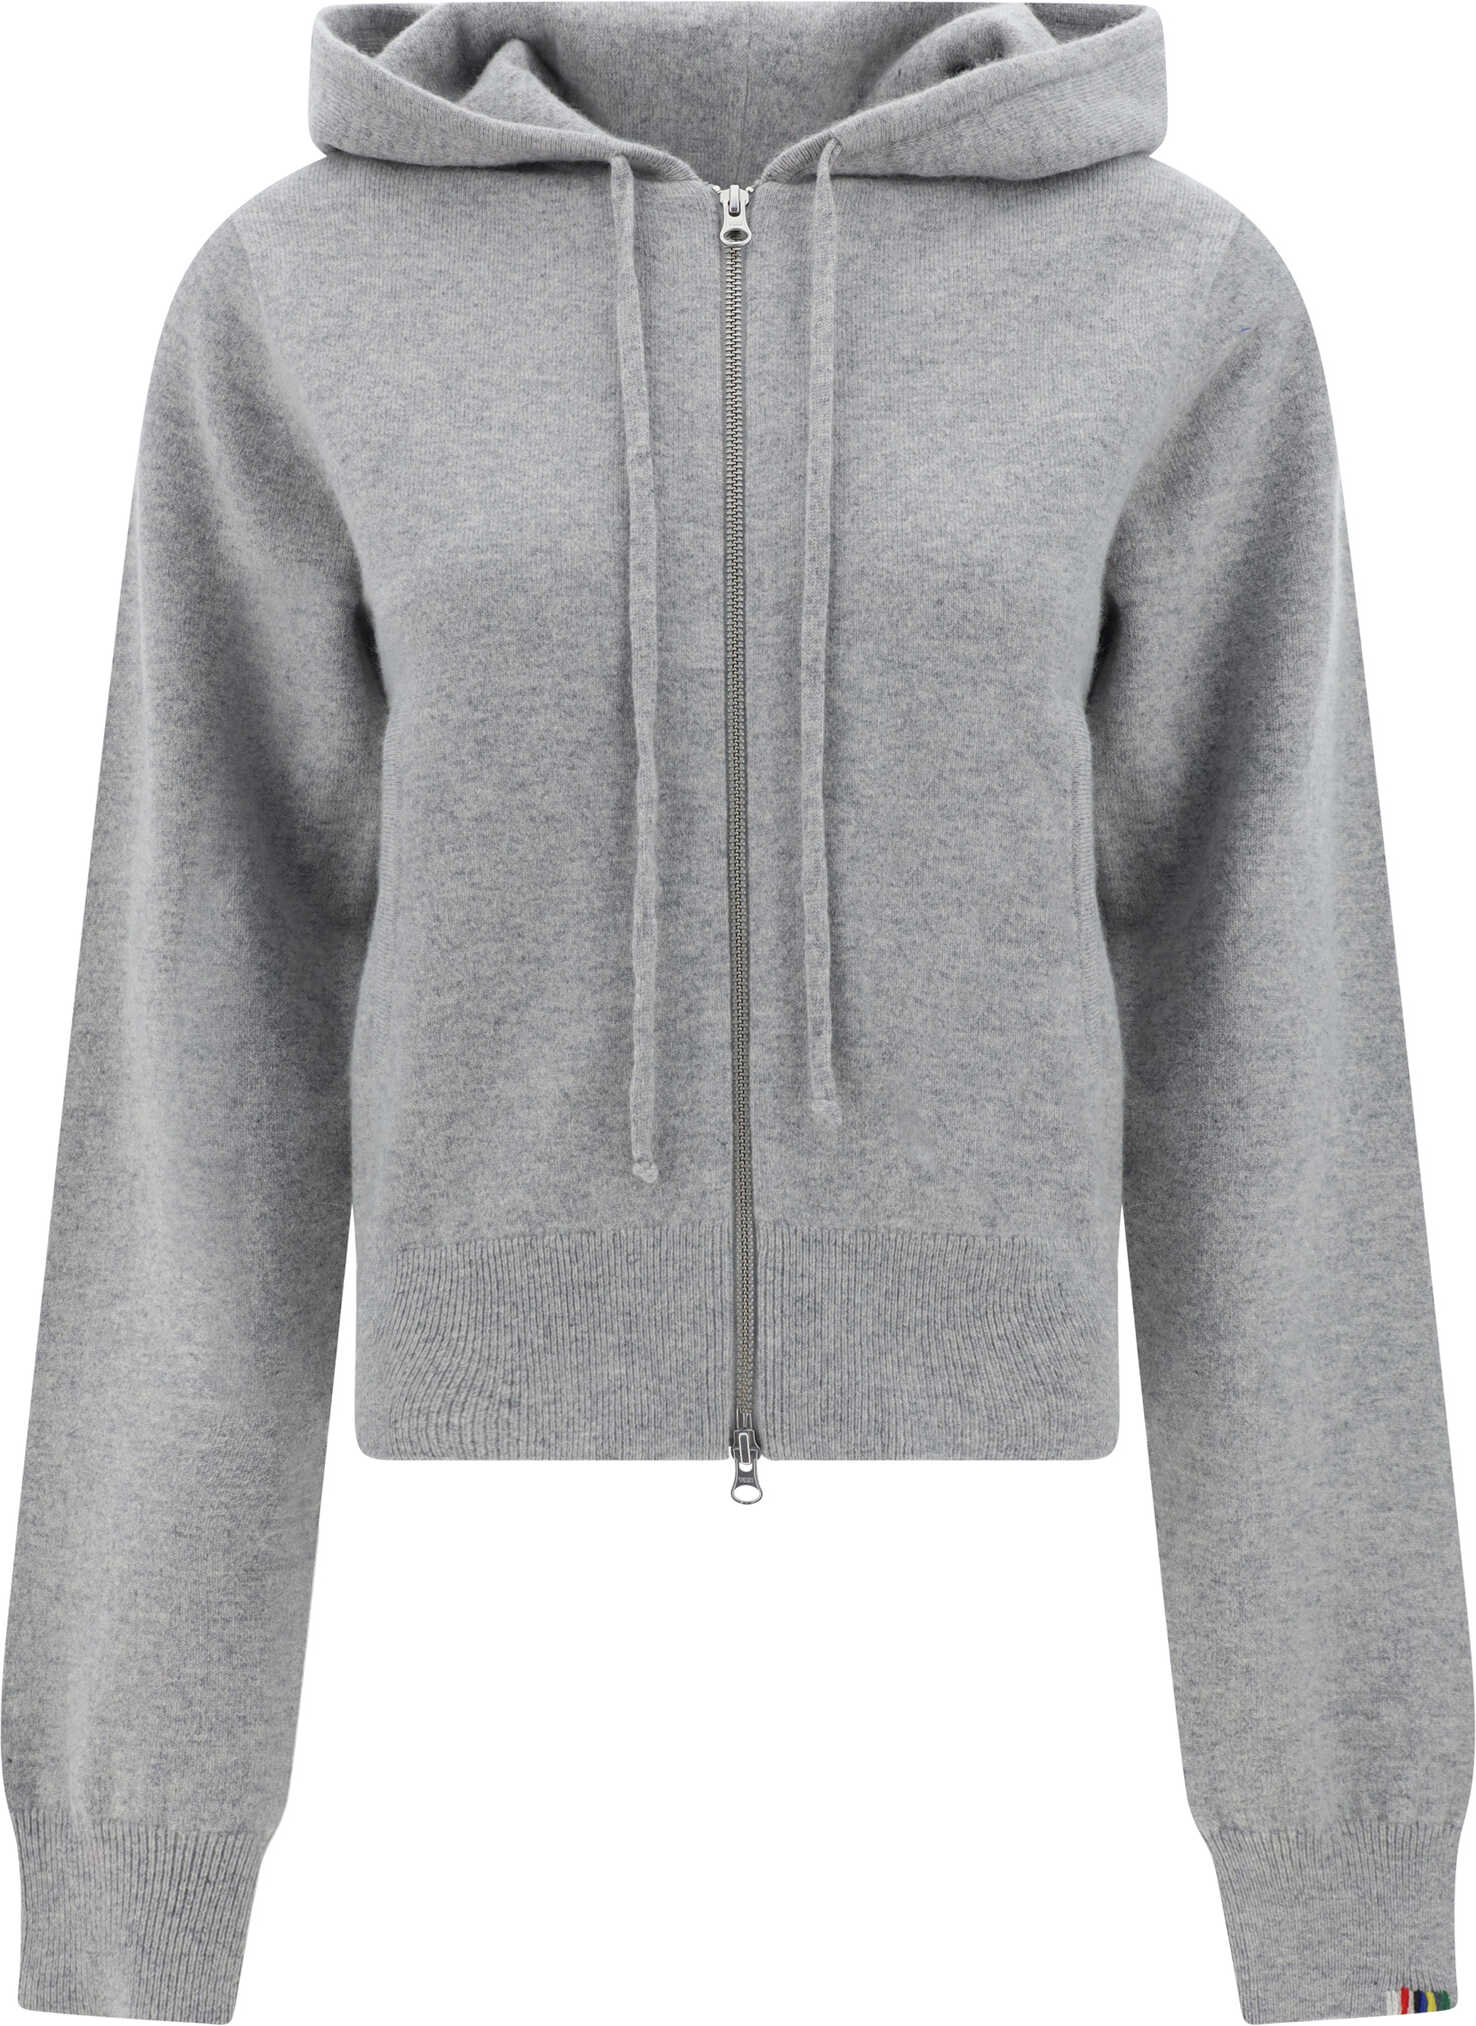 EXTREME CASHMERE Hoodie GREY